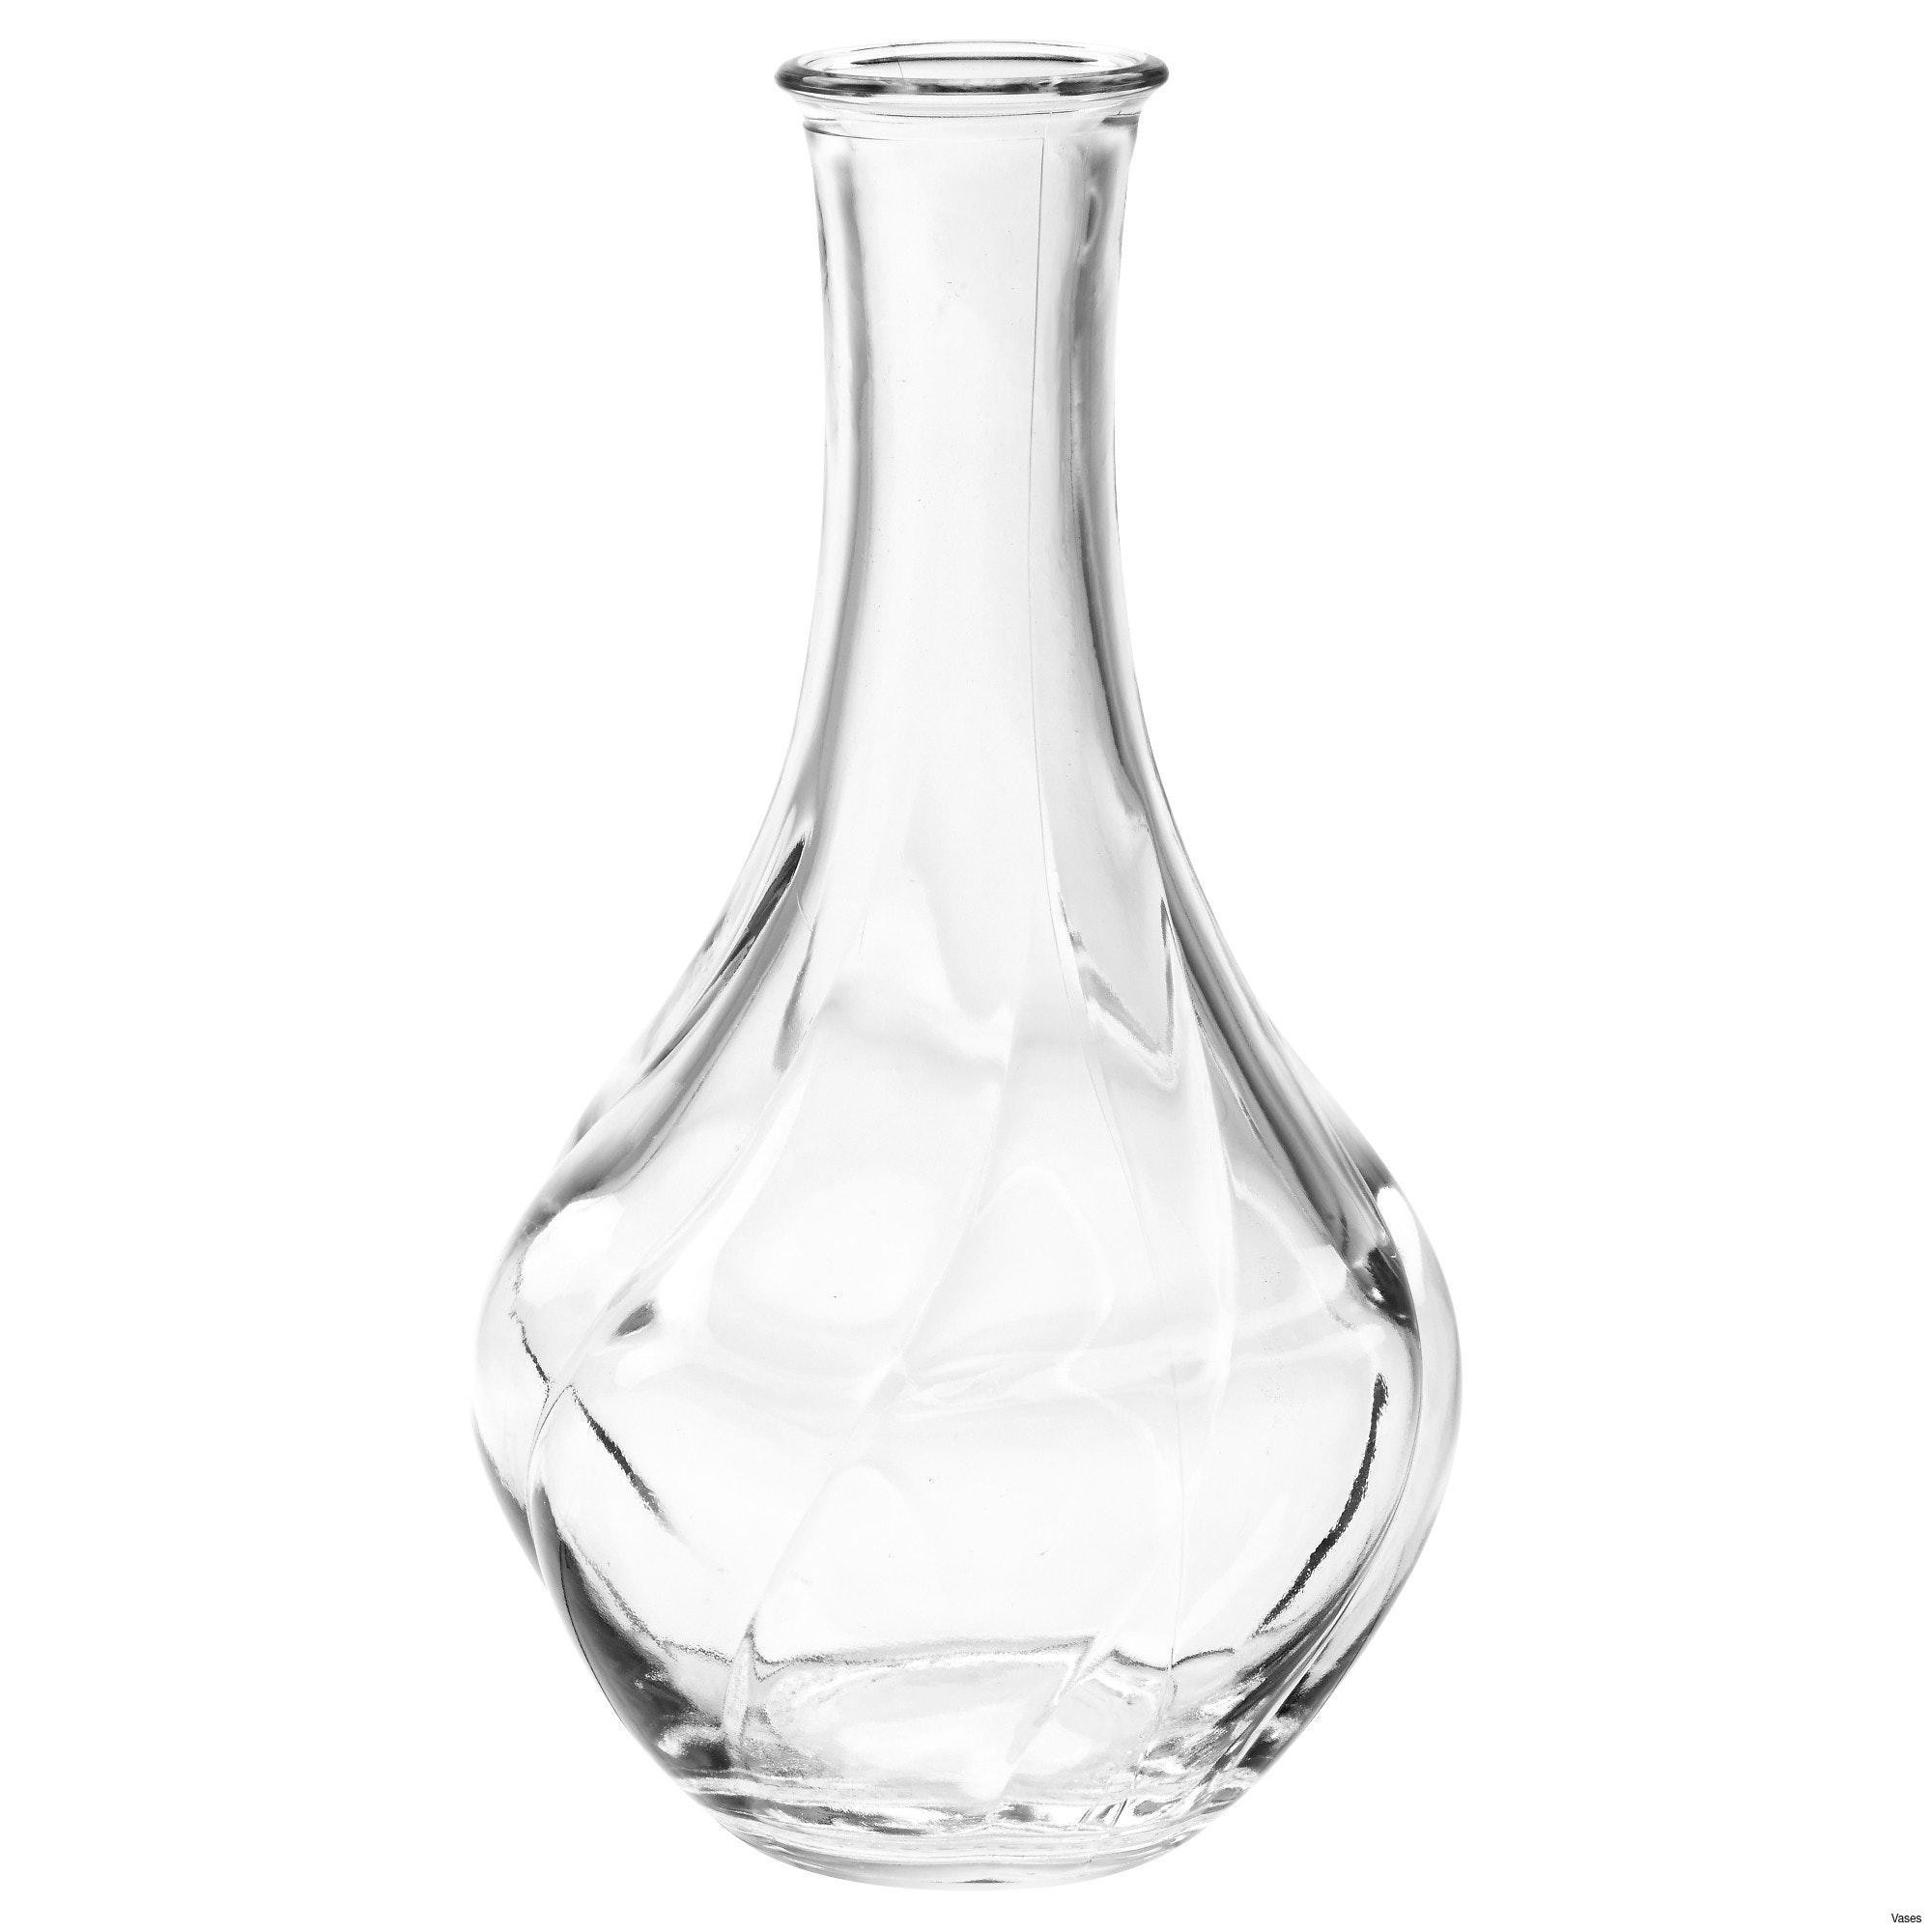 17 attractive Big Clear Glass Vase 2024 free download big clear glass vase of huge glass vase photos living room glass vases fresh clear vase 0d in huge glass vase photos living room glass vases fresh clear vase 0d tags amazing and of